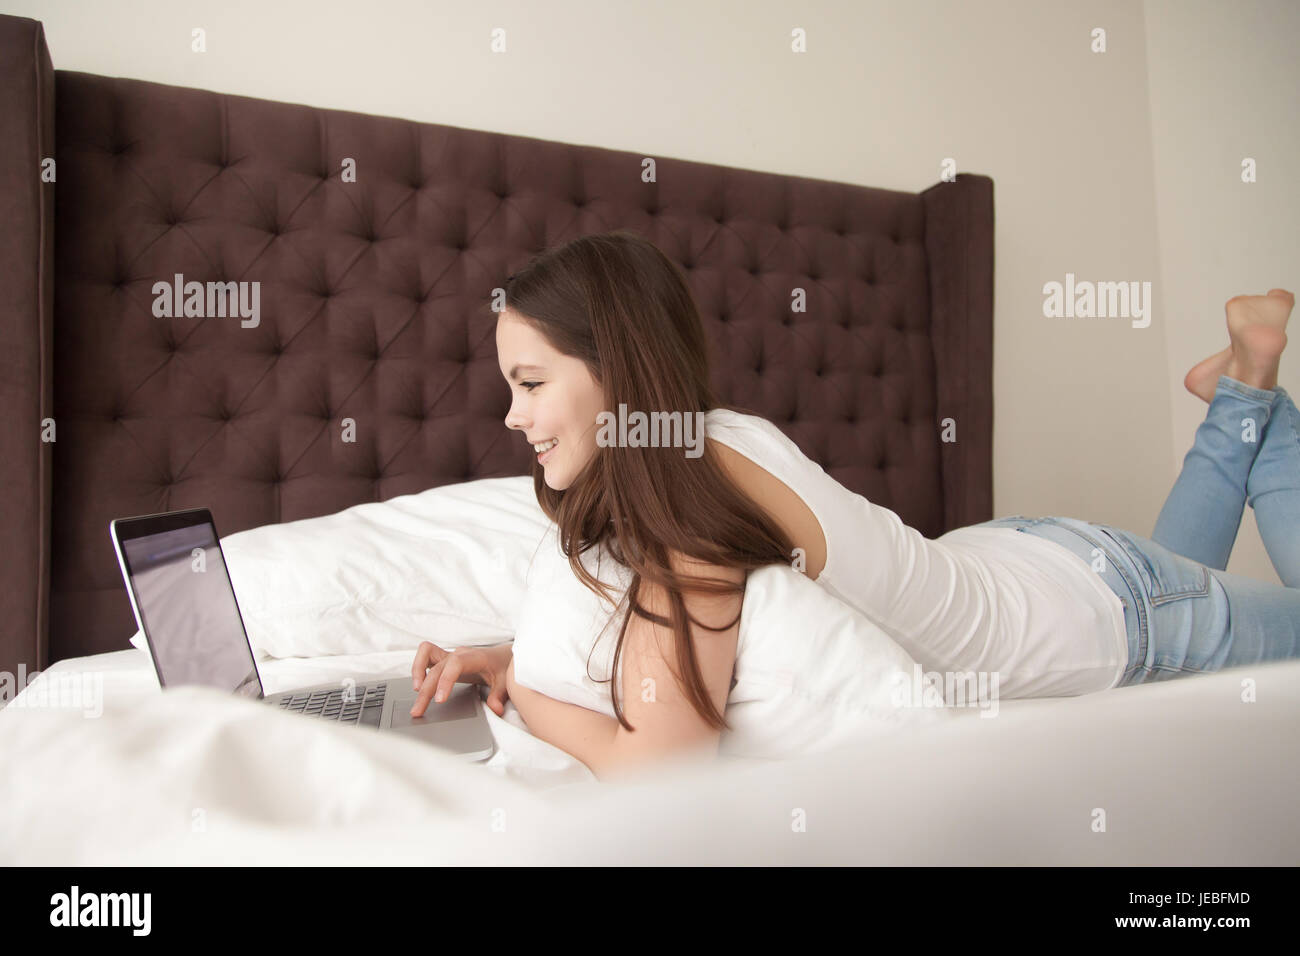 Happy young woman using laptop in bedroom Banque D'Images